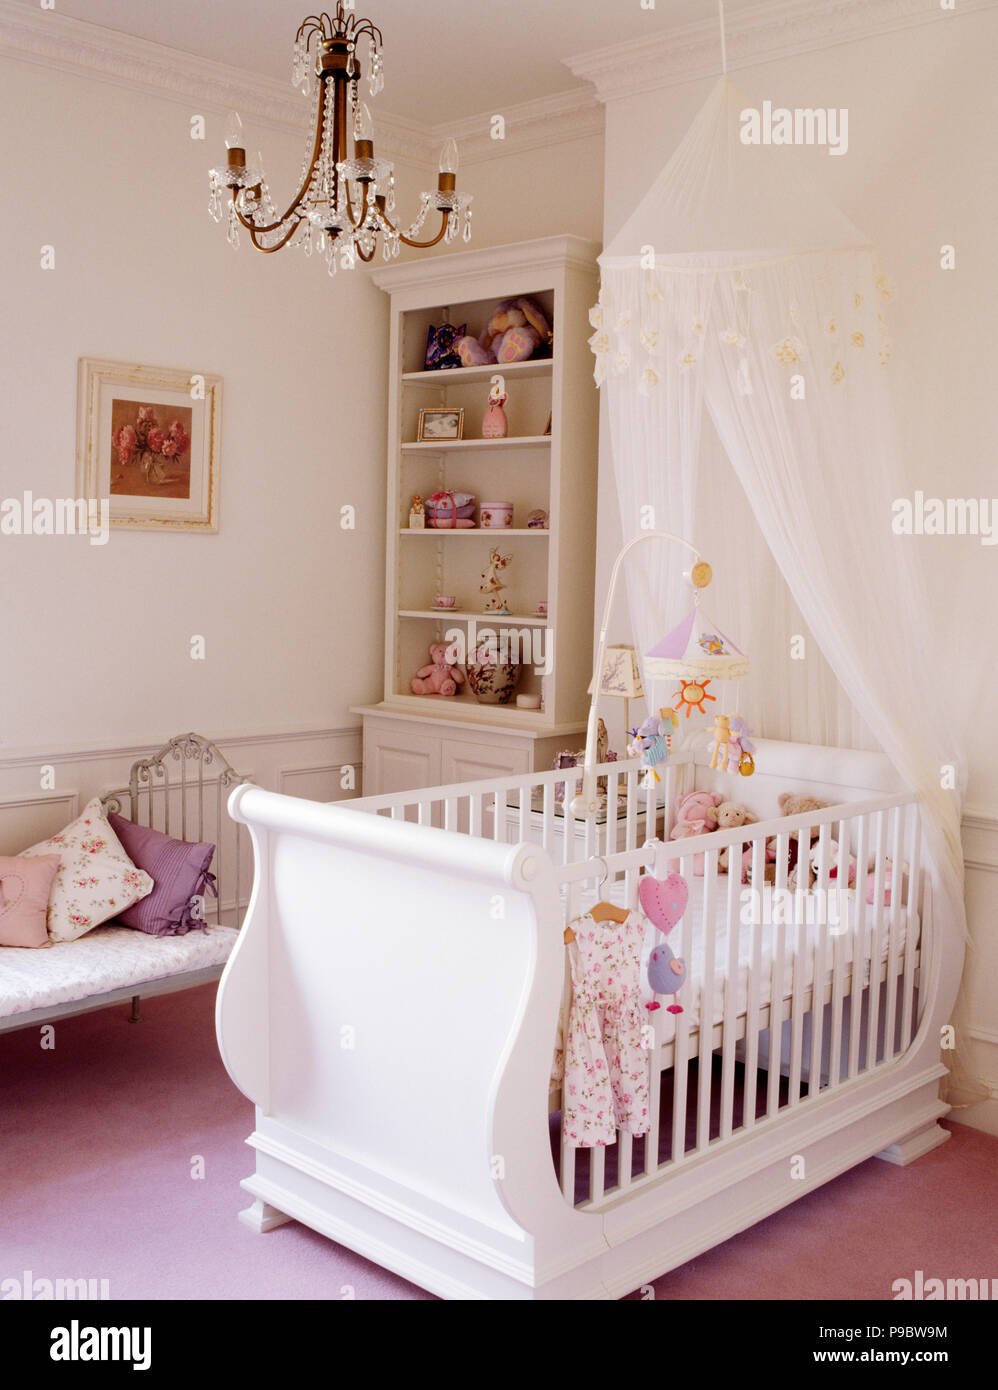 White drapes on white cot in nursery bedroom Stock Photo